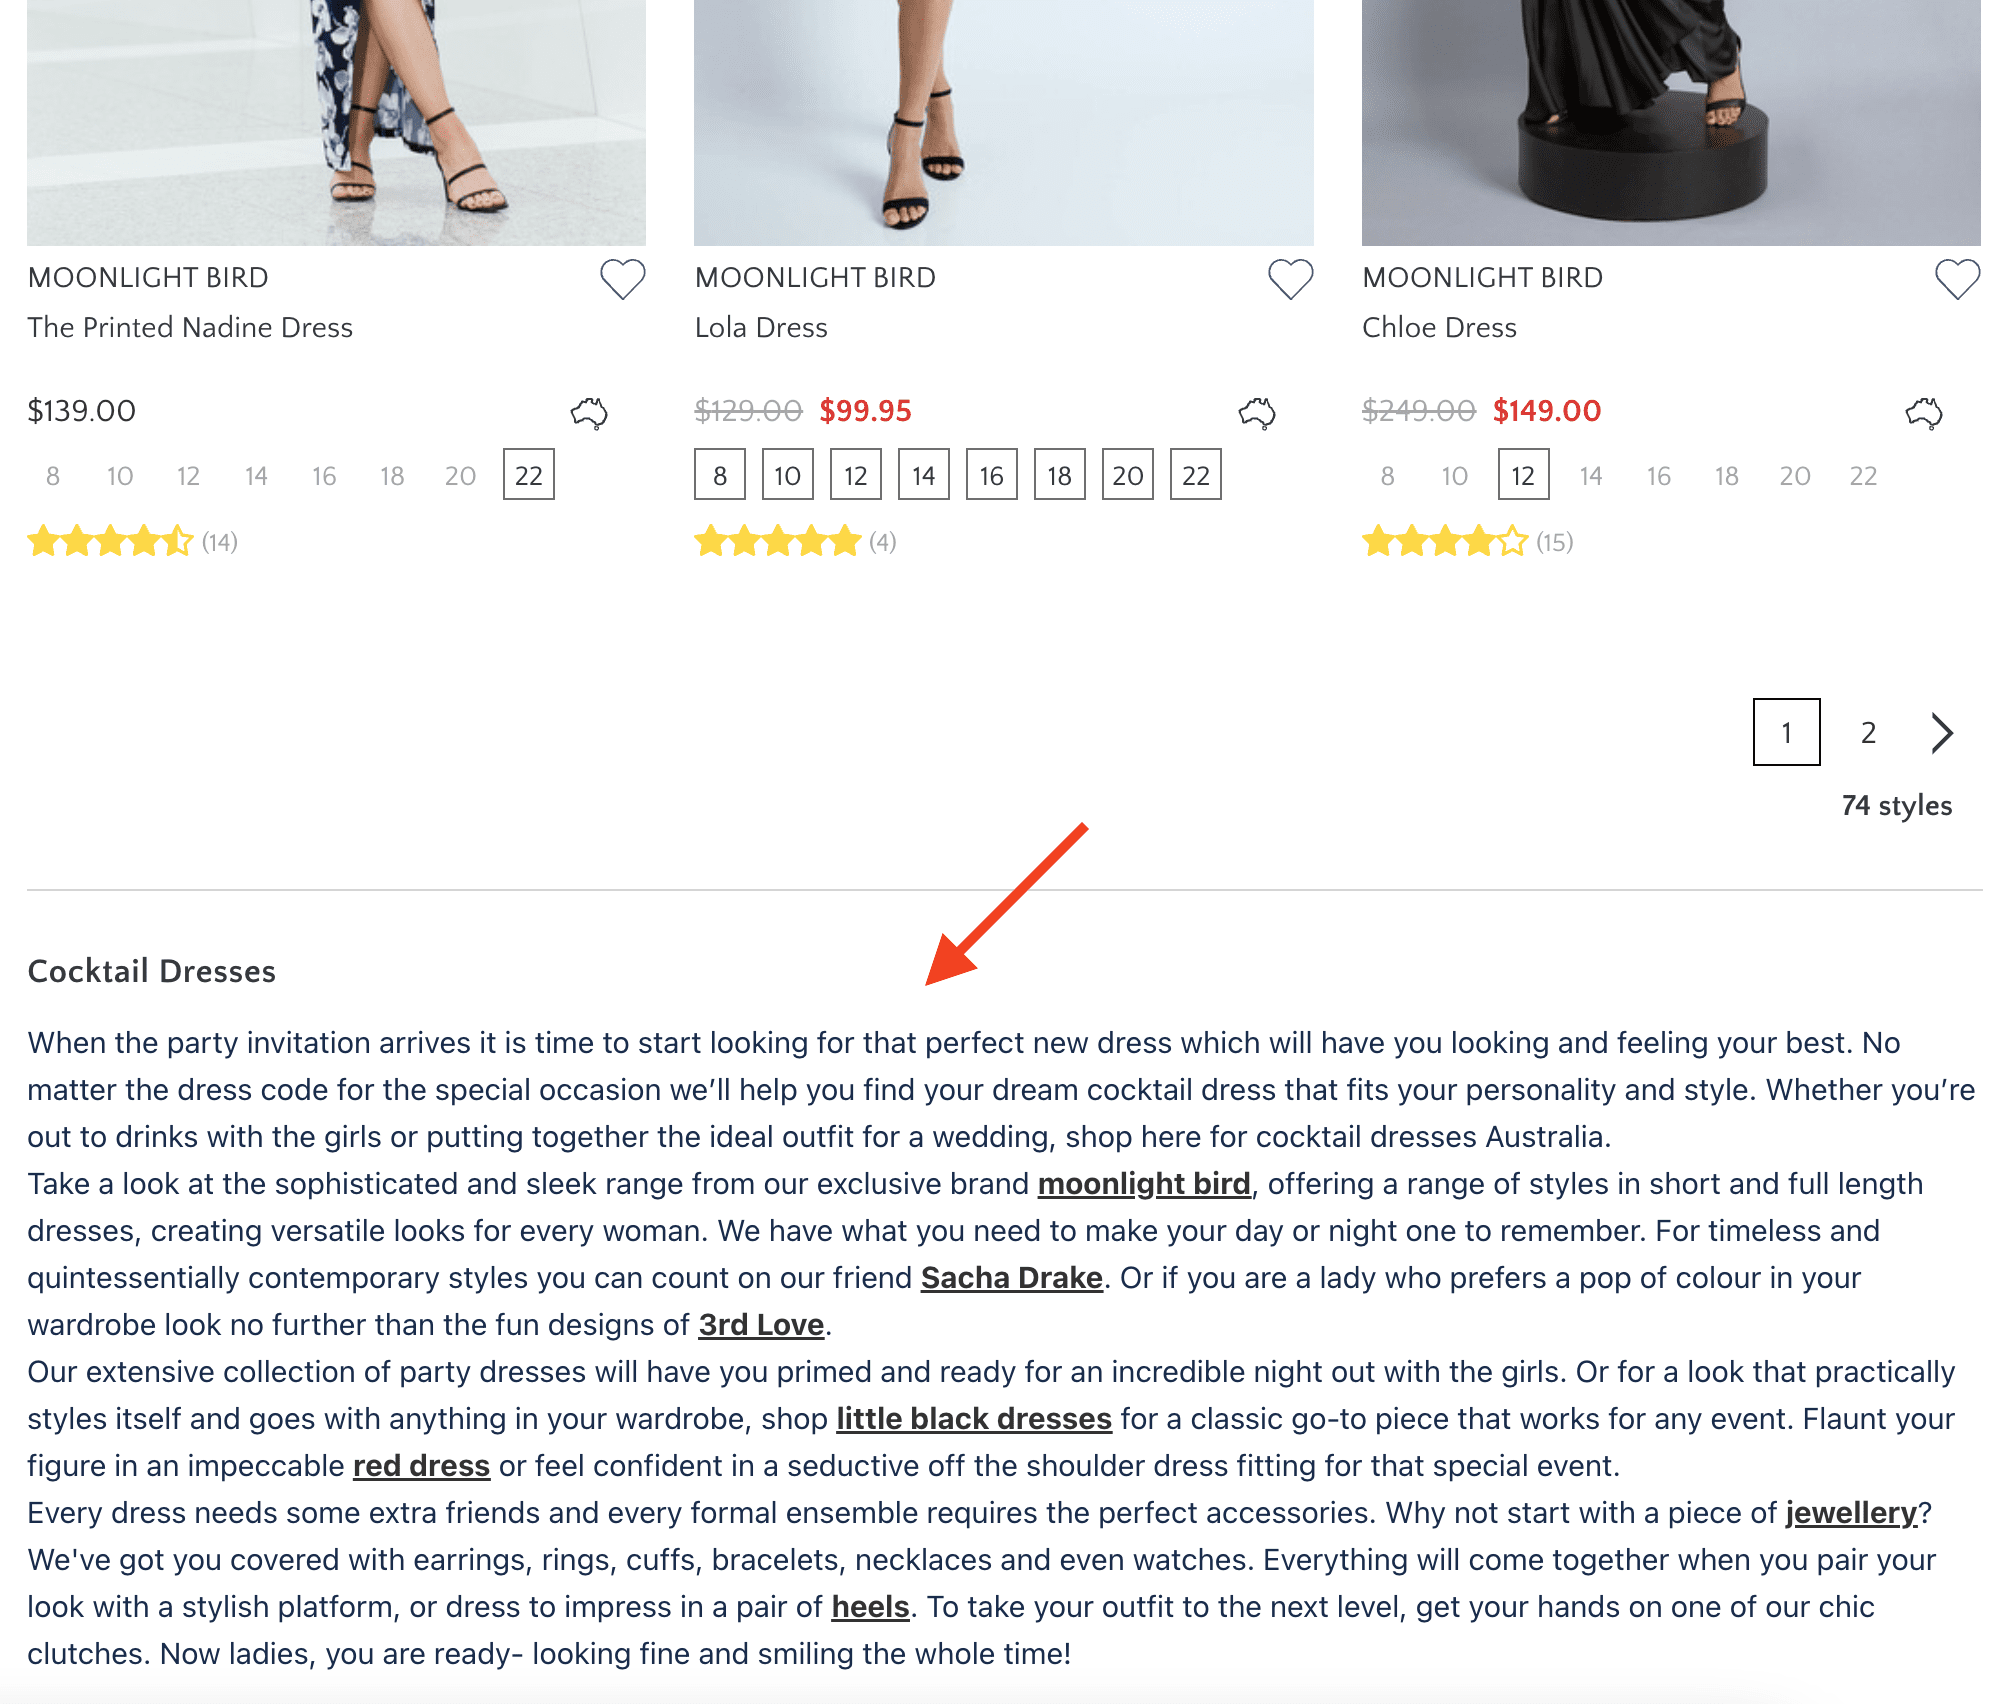 Longer Category Descriptions at Bottom of Page 